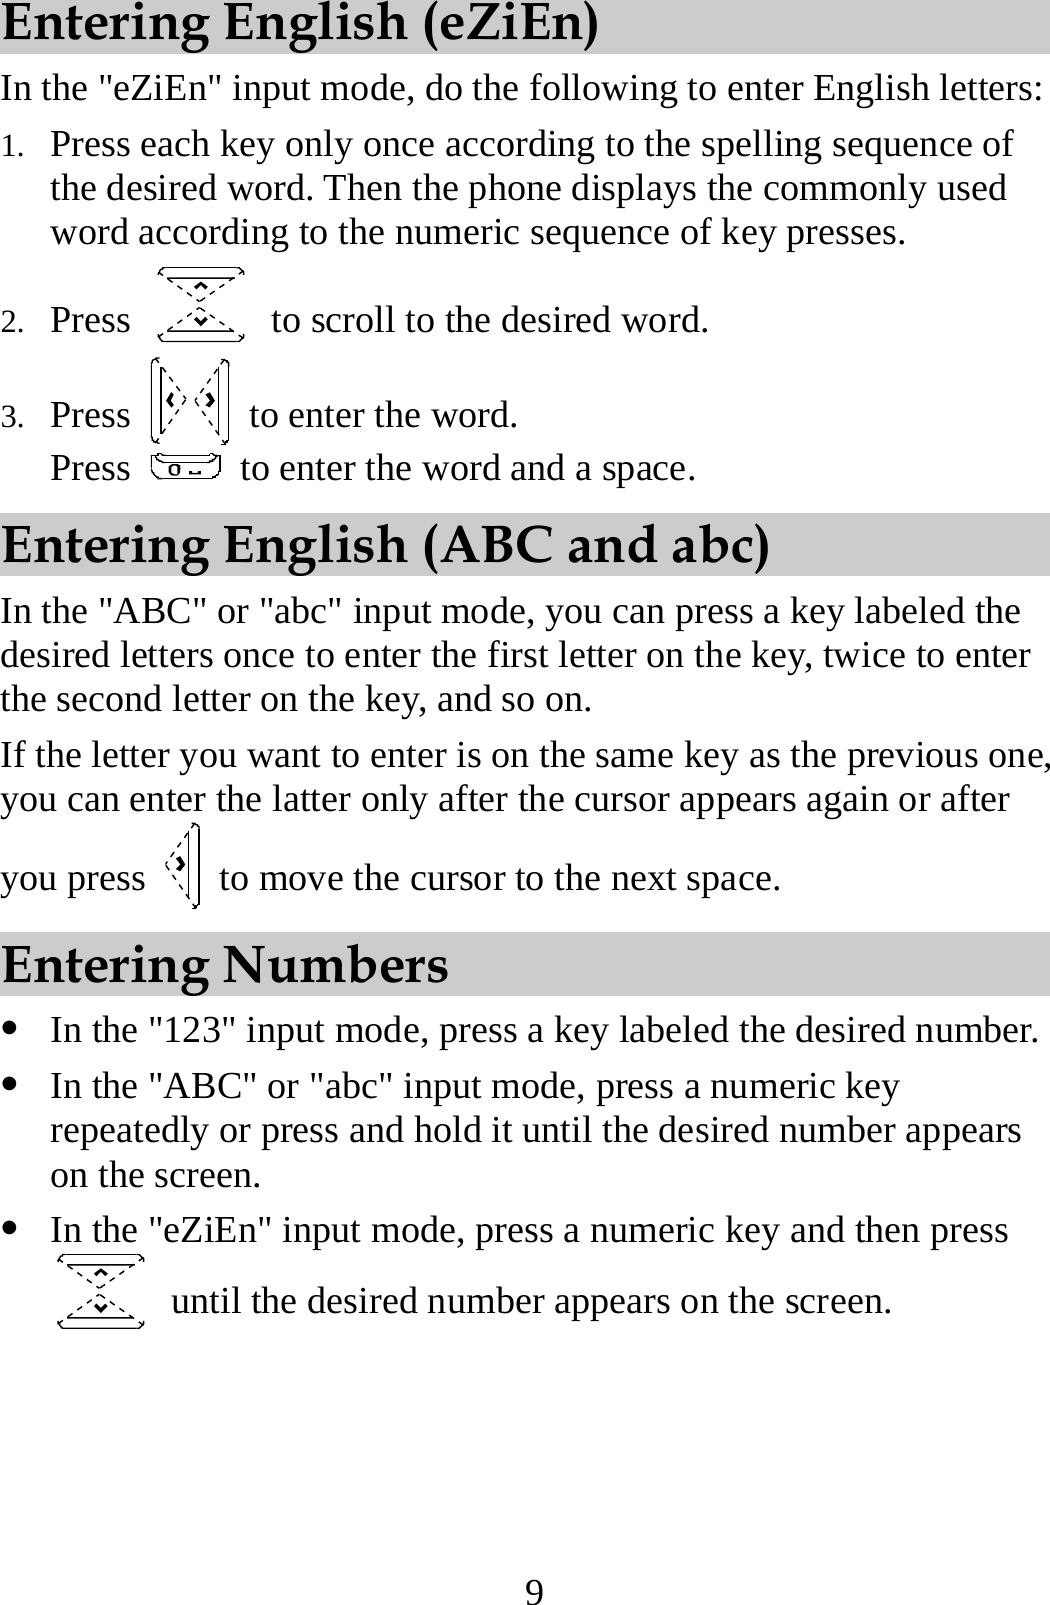 9 Entering English (eZiEn) In the &quot;eZiEn&quot; input mode, do the following to enter English letters: 1. Press each key only once according to the spelling sequence of the desired word. Then the phone displays the commonly used word according to the numeric sequence of key presses. 2. Press    to scroll to the desired word. 3. Press   to enter the word. Press    to enter the word and a space. Entering English (ABC and abc) In the &quot;ABC&quot; or &quot;abc&quot; input mode, you can press a key labeled the desired letters once to enter the first letter on the key, twice to enter the second letter on the key, and so on. If the letter you want to enter is on the same key as the previous one, you can enter the latter only after the cursor appears again or after you press    to move the cursor to the next space. Entering Numbers z In the &quot;123&quot; input mode, press a key labeled the desired number. z In the &quot;ABC&quot; or &quot;abc&quot; input mode, press a numeric key repeatedly or press and hold it until the desired number appears on the screen. z In the &quot;eZiEn&quot; input mode, press a numeric key and then press   until the desired number appears on the screen. 